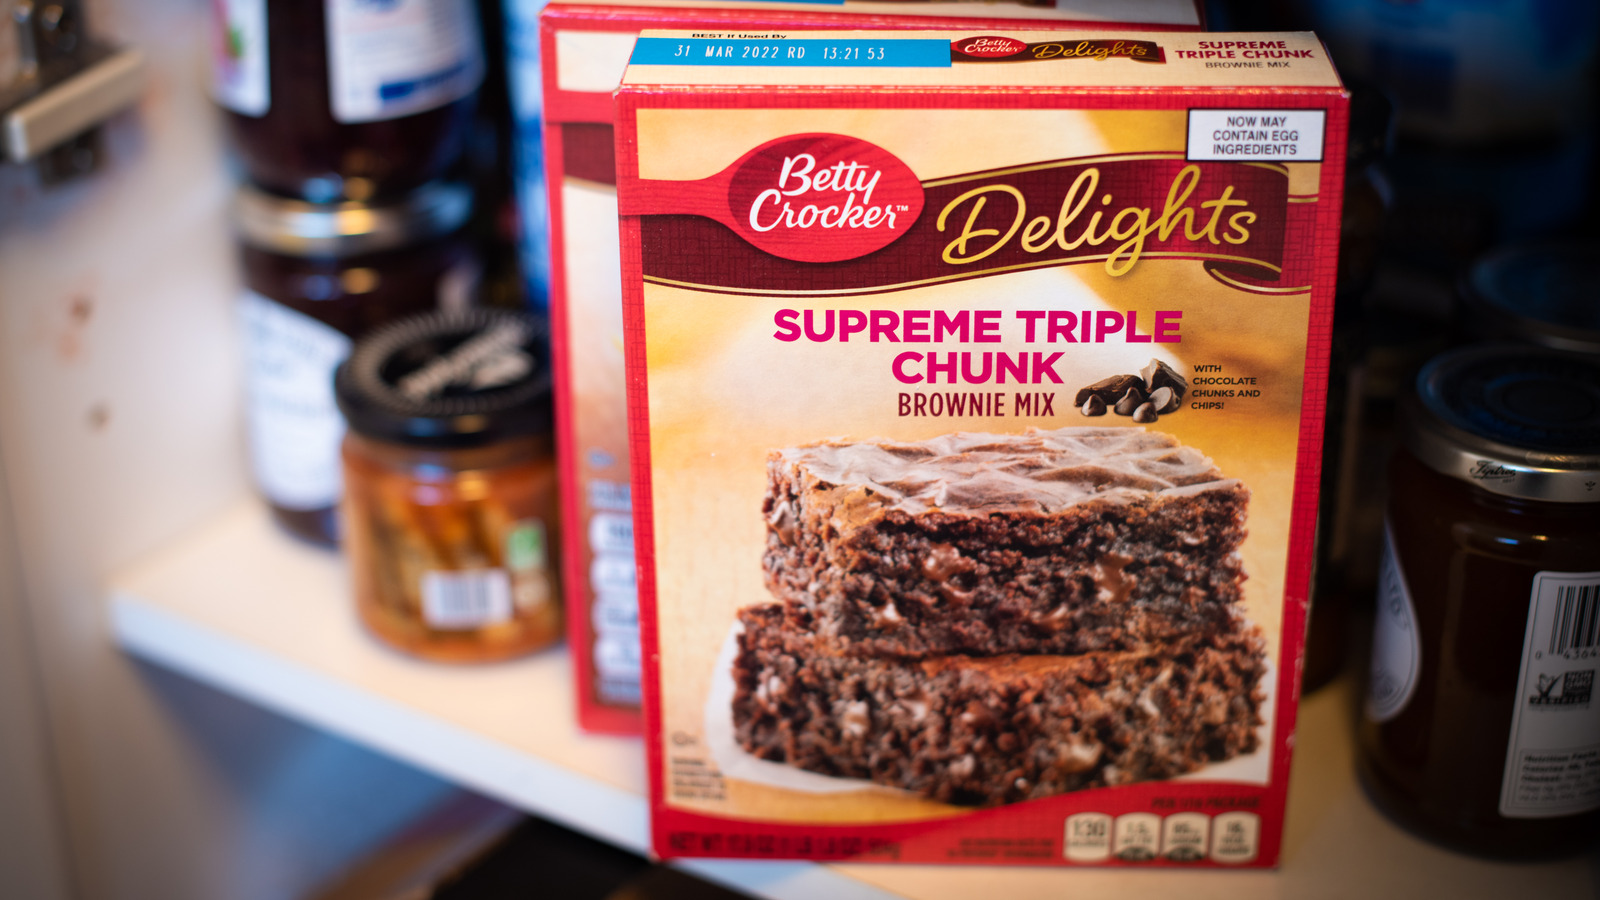 https://www.mashed.com/img/gallery/betty-crocker-wants-to-feature-your-recipe-on-their-packaging/l-intro-1634840229.jpg